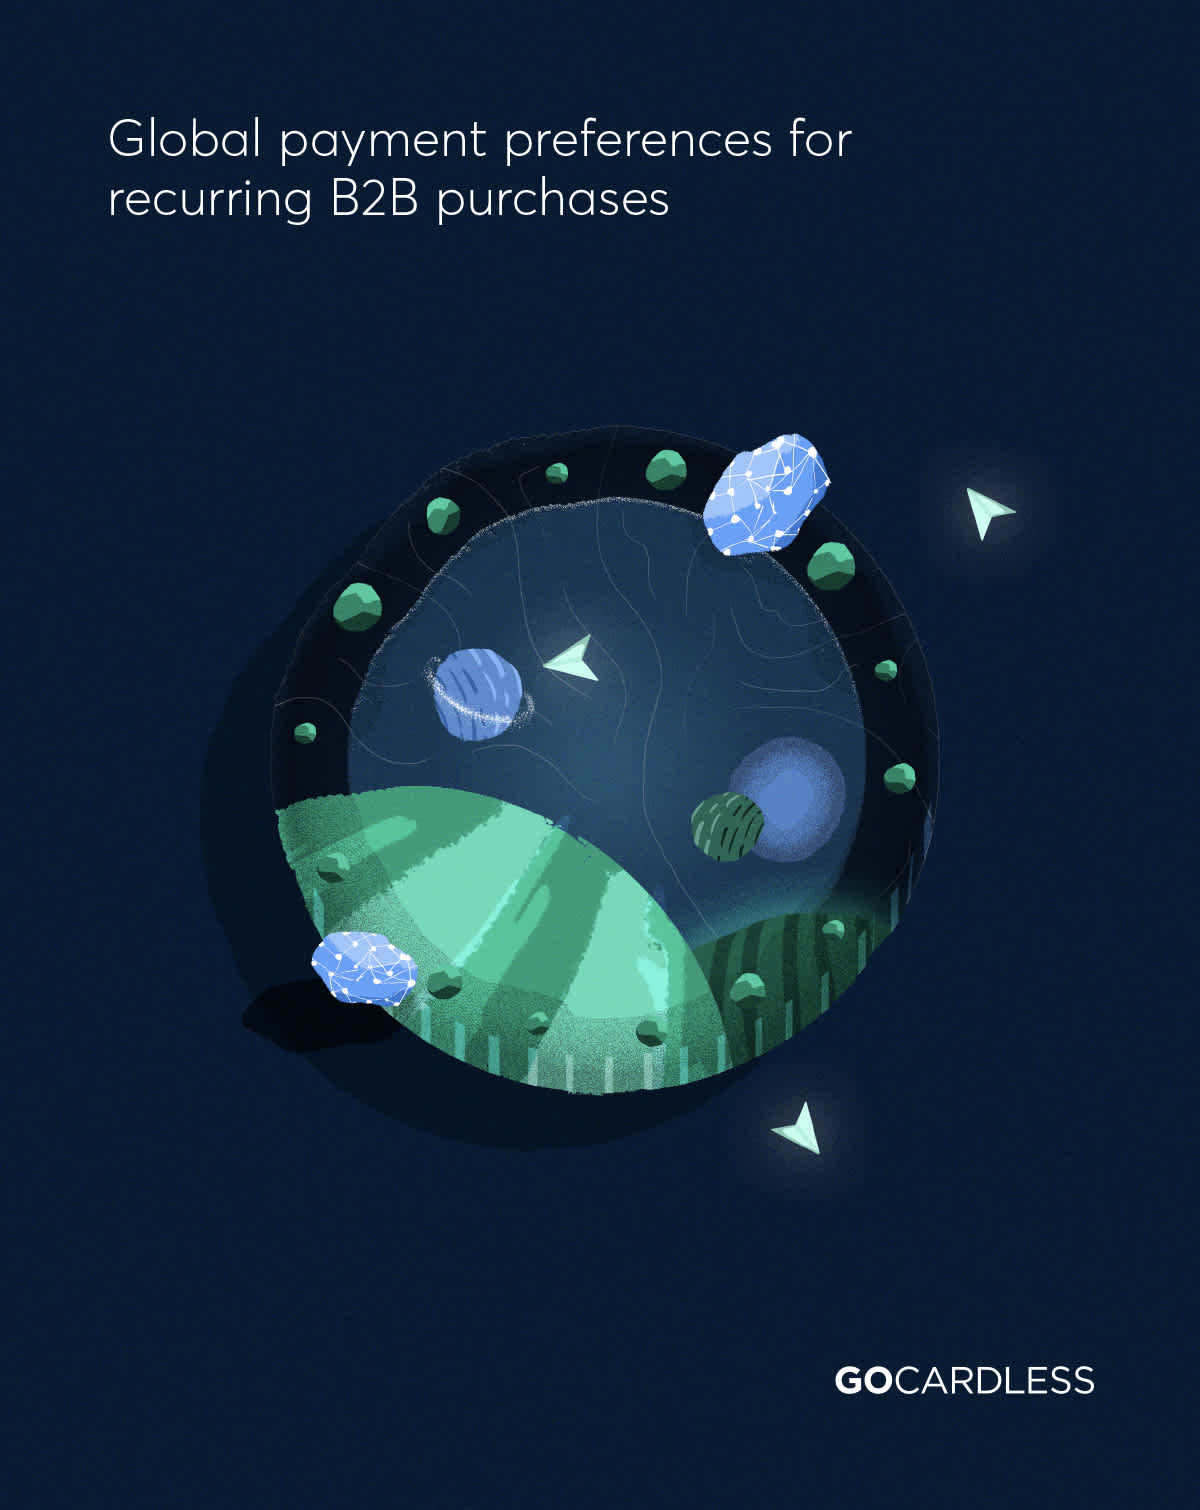 [Report] Global payment preferences for recurring B2B purchases 2021